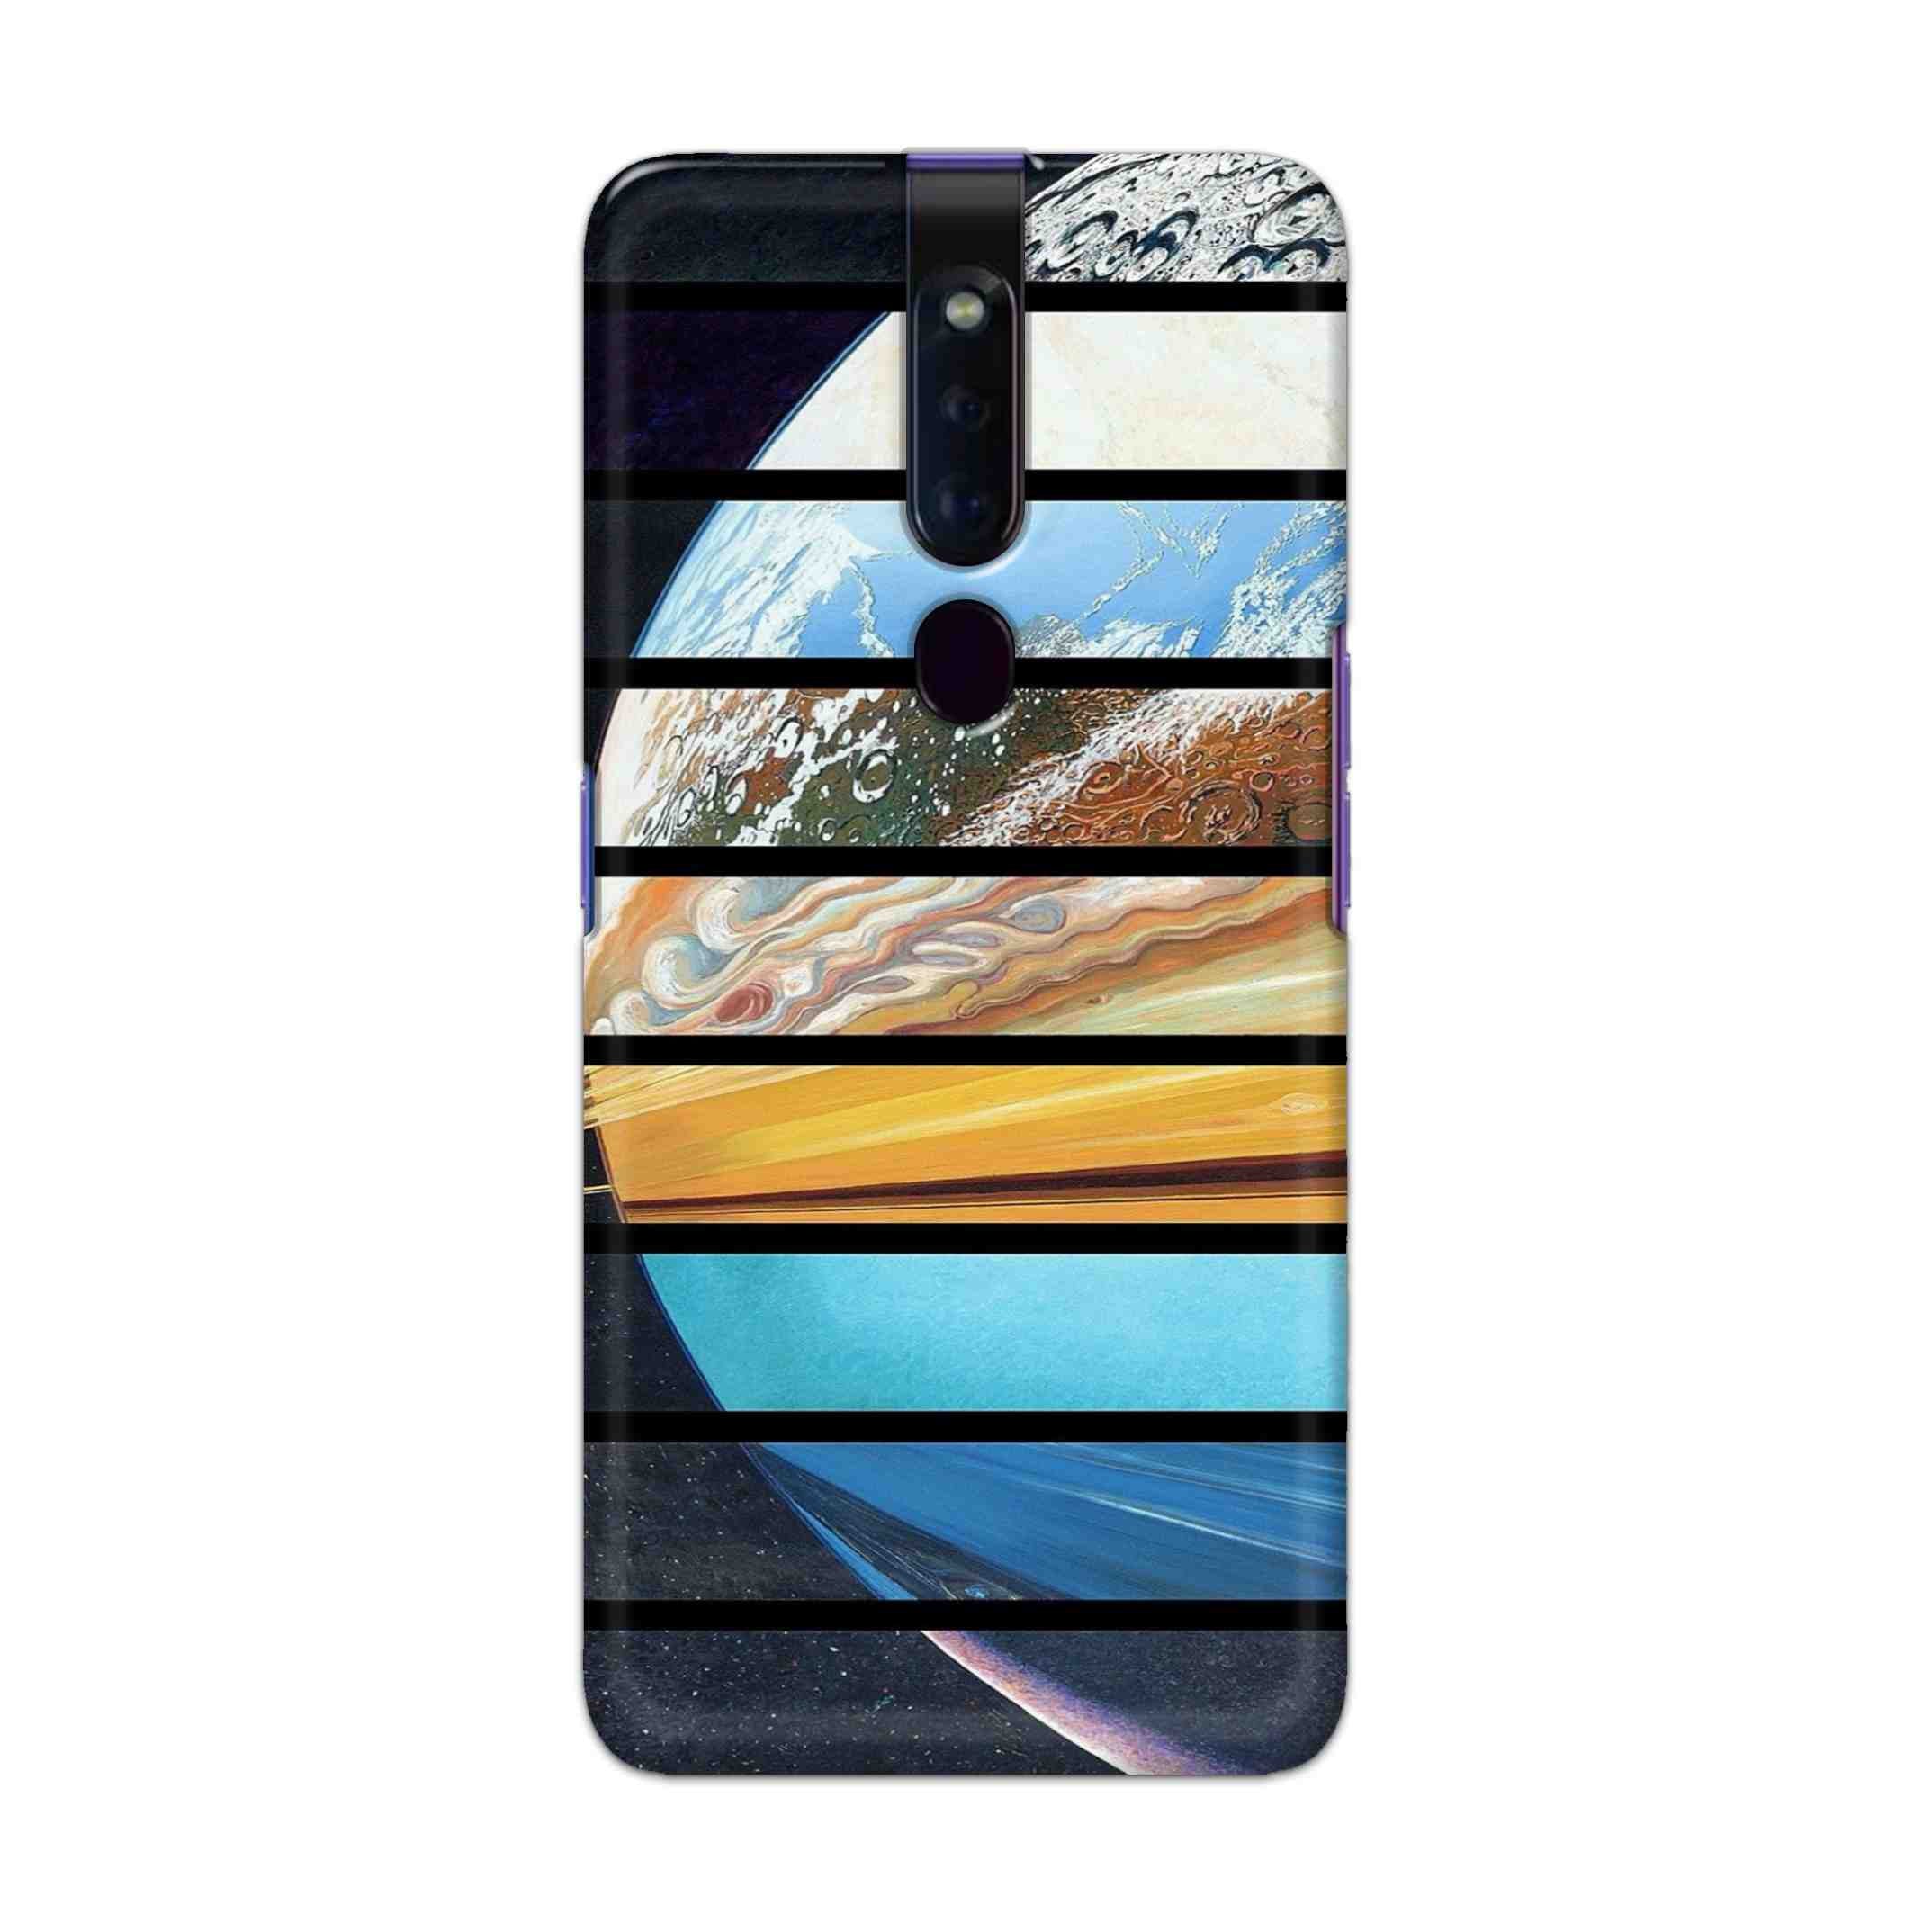 Buy Colourful Earth Hard Back Mobile Phone Case Cover For Oppo F11 Pro Online